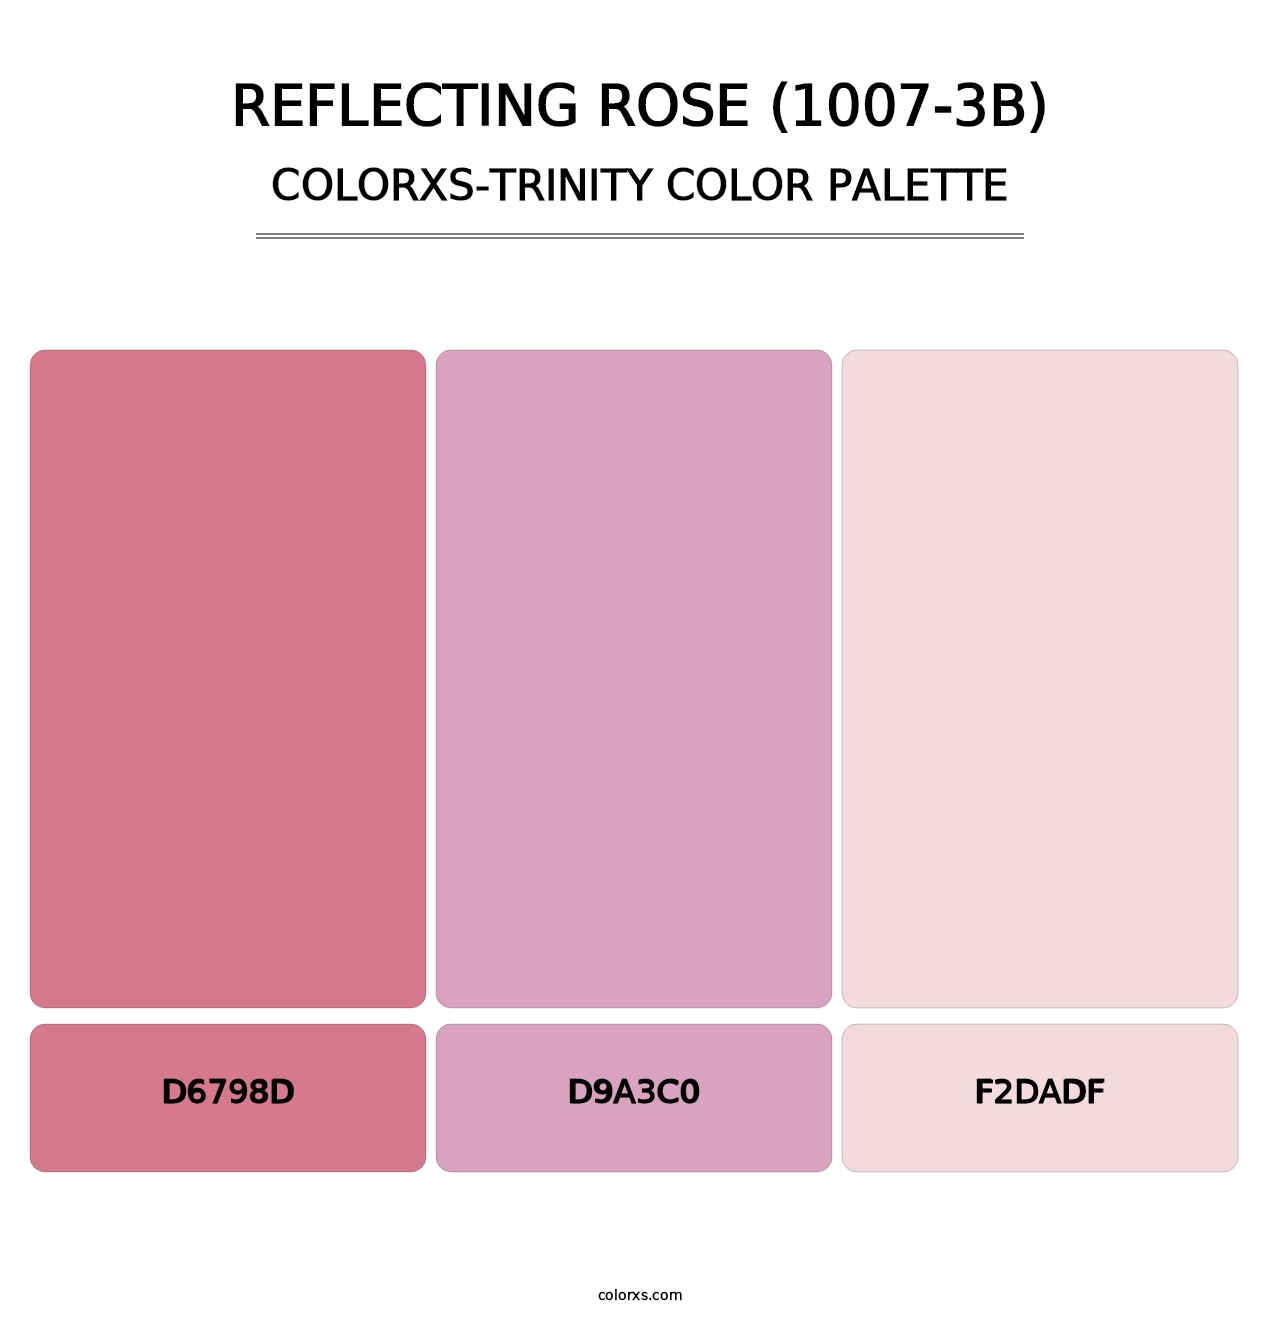 Reflecting Rose (1007-3B) - Colorxs Trinity Palette